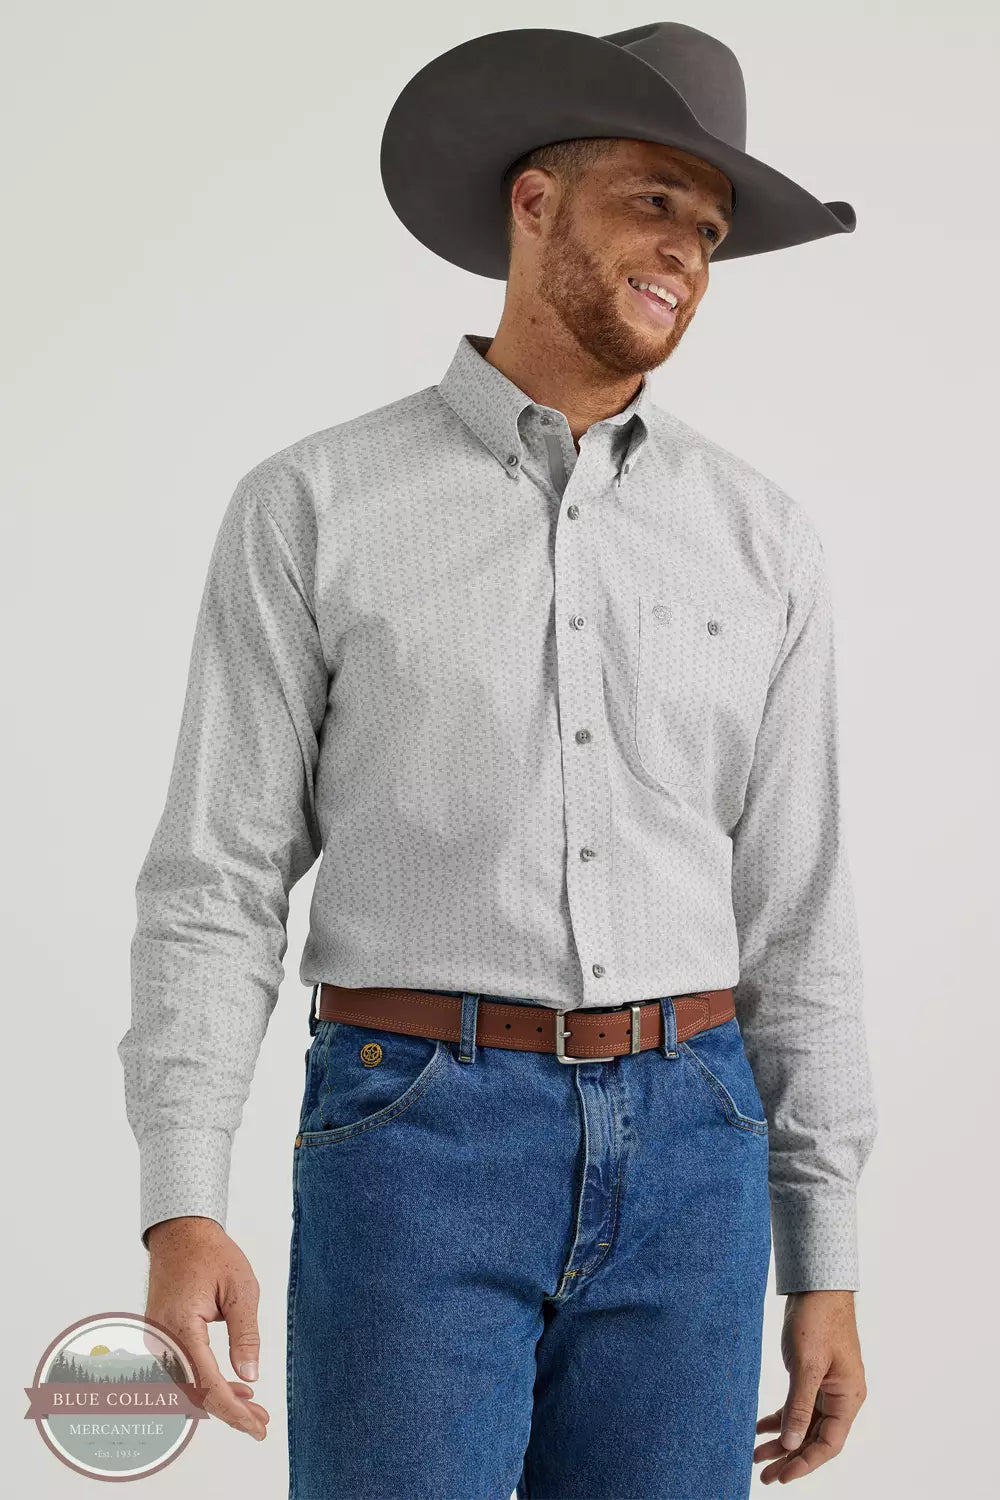 Wrangler 112344887 George Strait Long Sleeve Button Down Shirt in Grey Hatches Front View